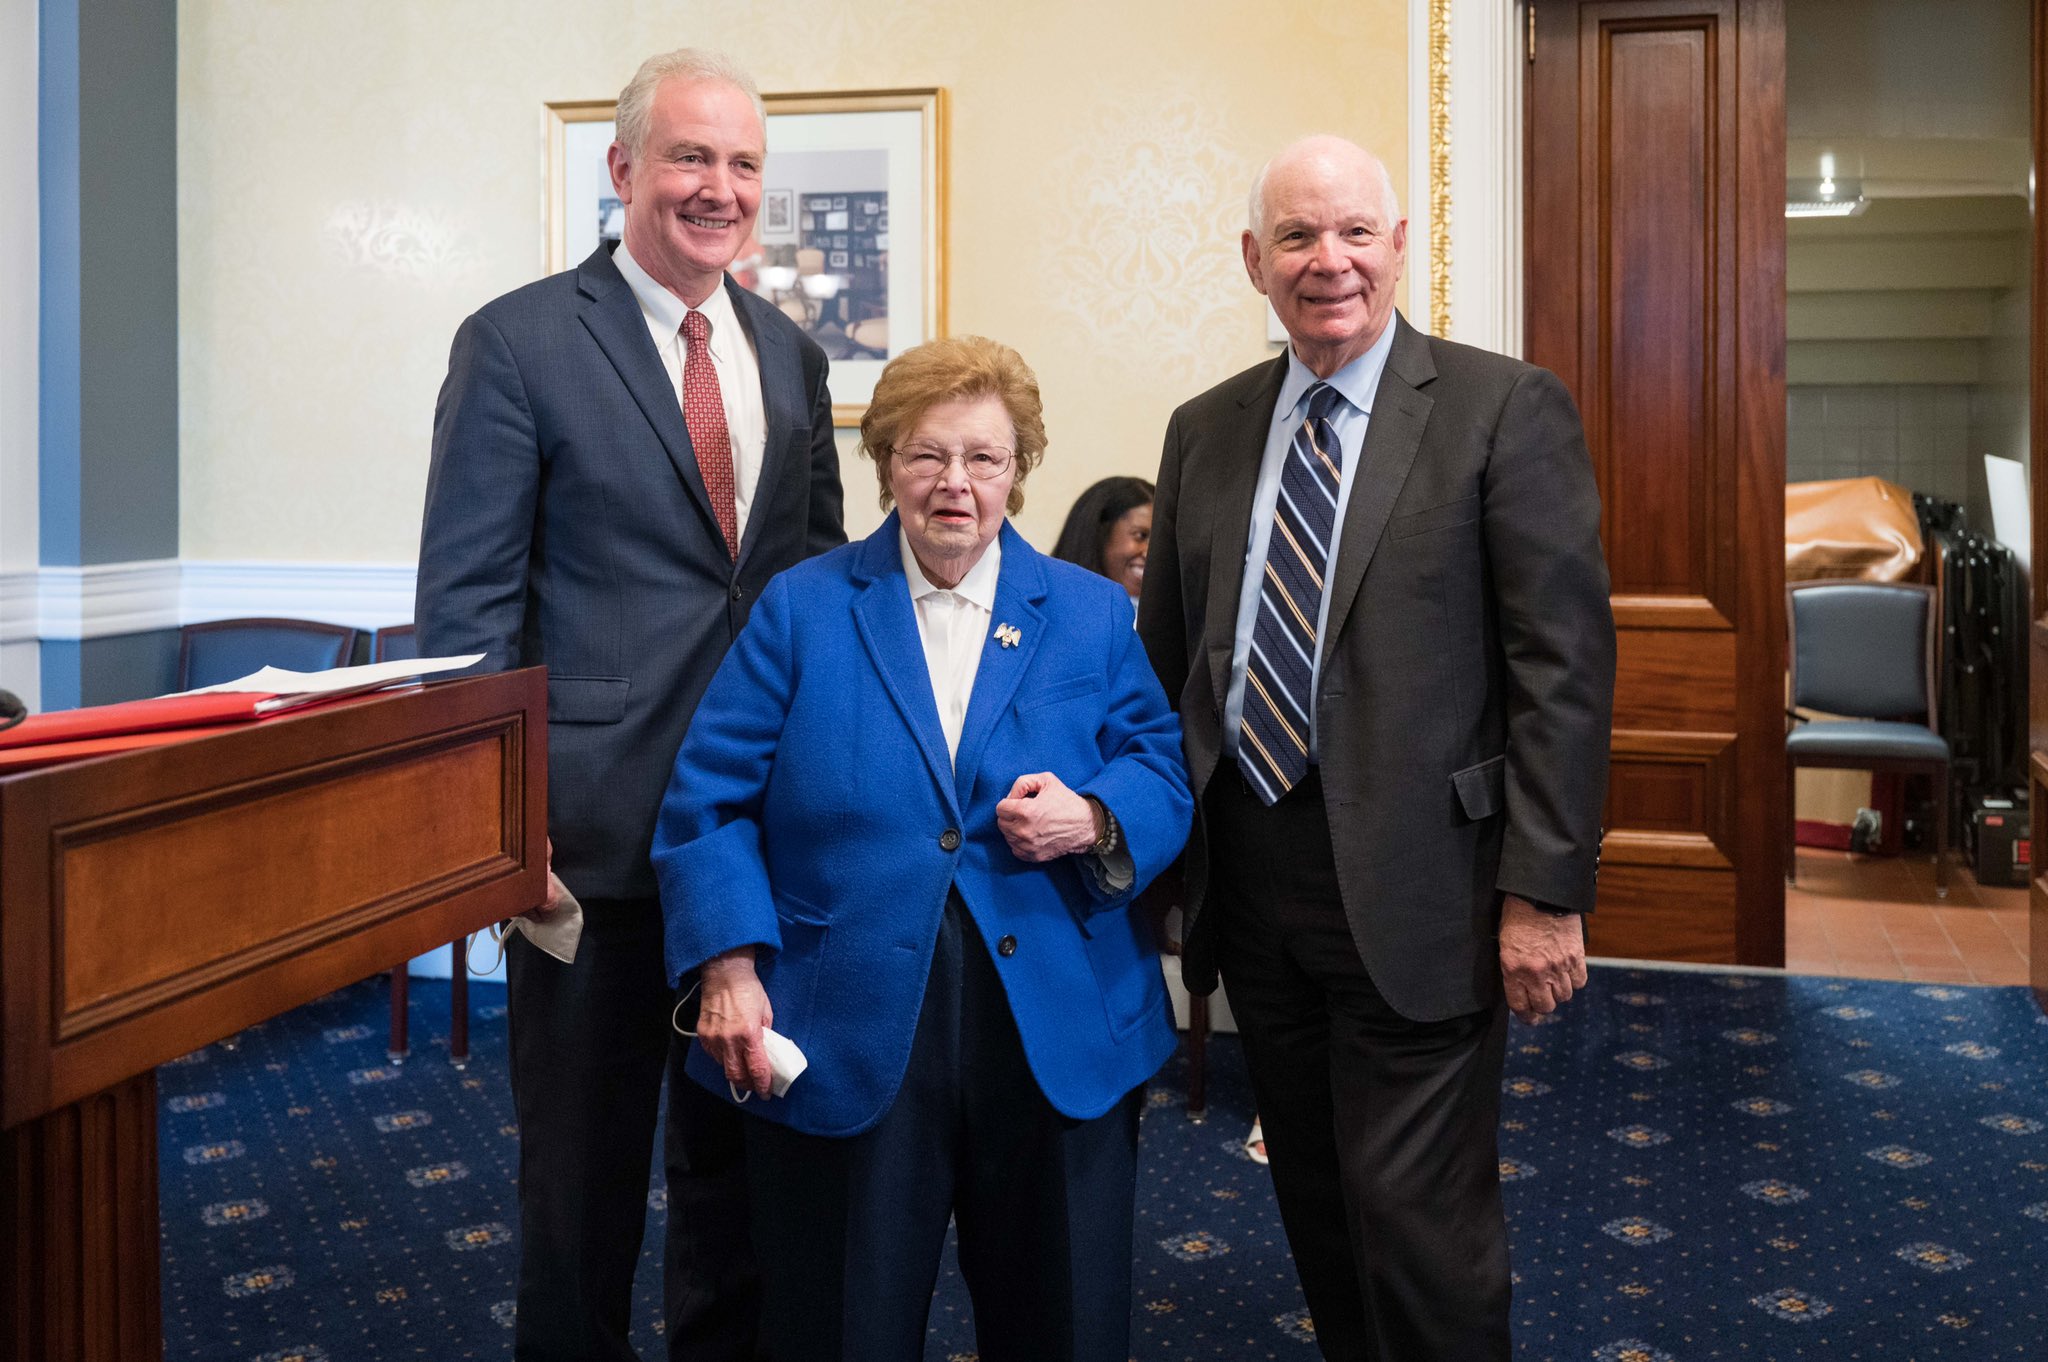 Van Hollen, Cardin, Colleagues Hold Dedication Ceremony for Rooms Honoring Senators Barbara Mikulski and Margaret Chase Smith